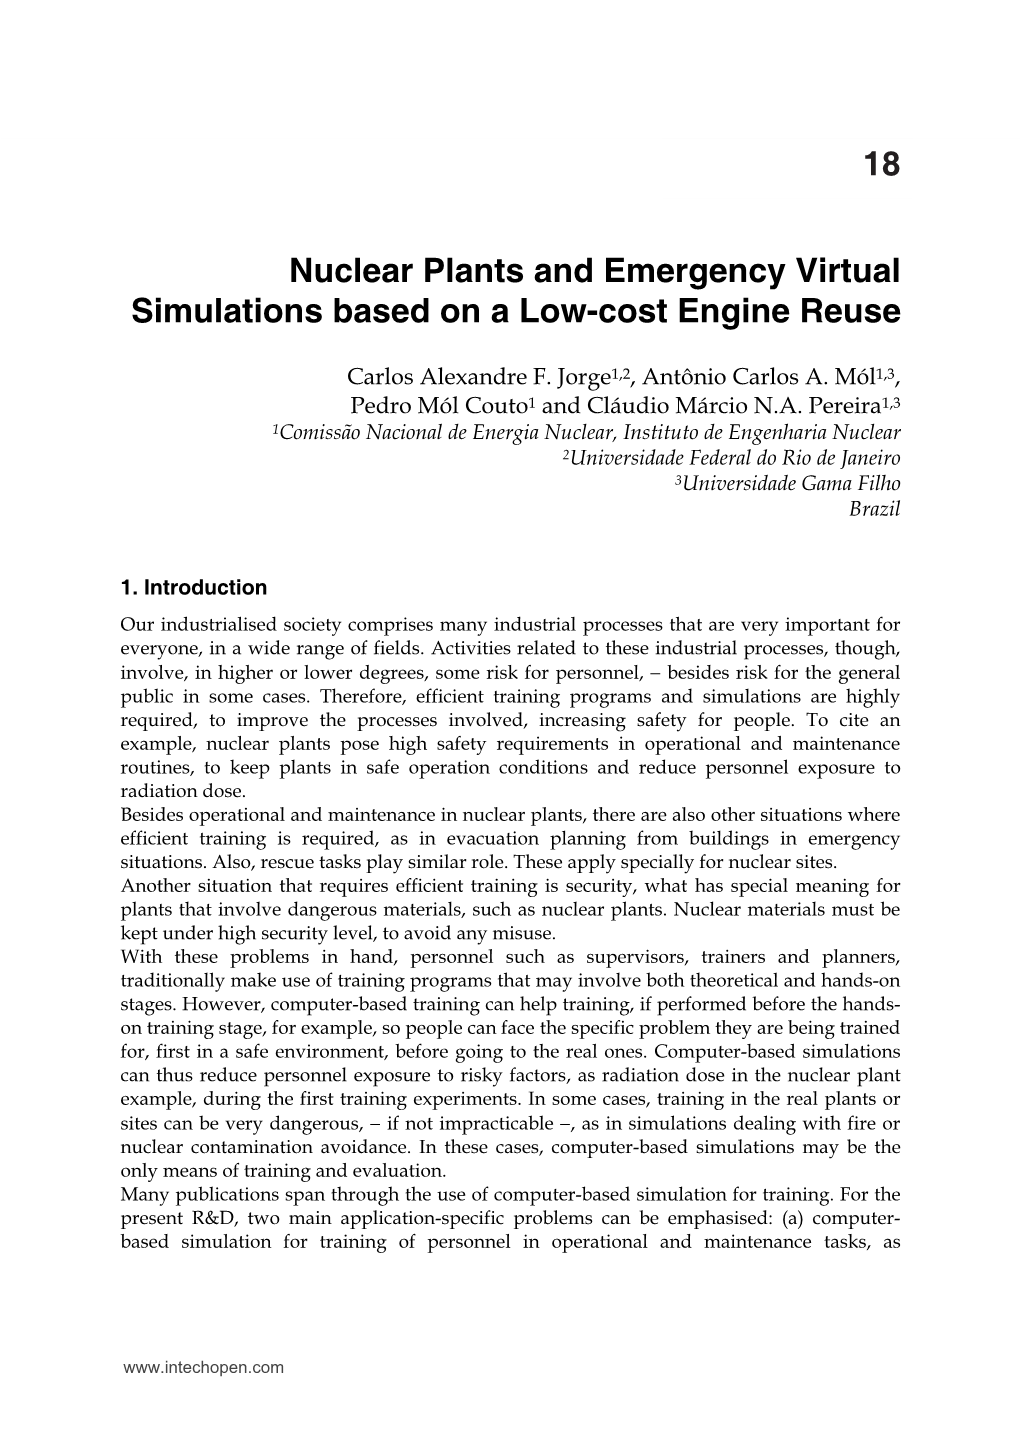 Nuclear Plants and Emergency Virtual Simulations Based on a Low-Cost Engine Reuse 367